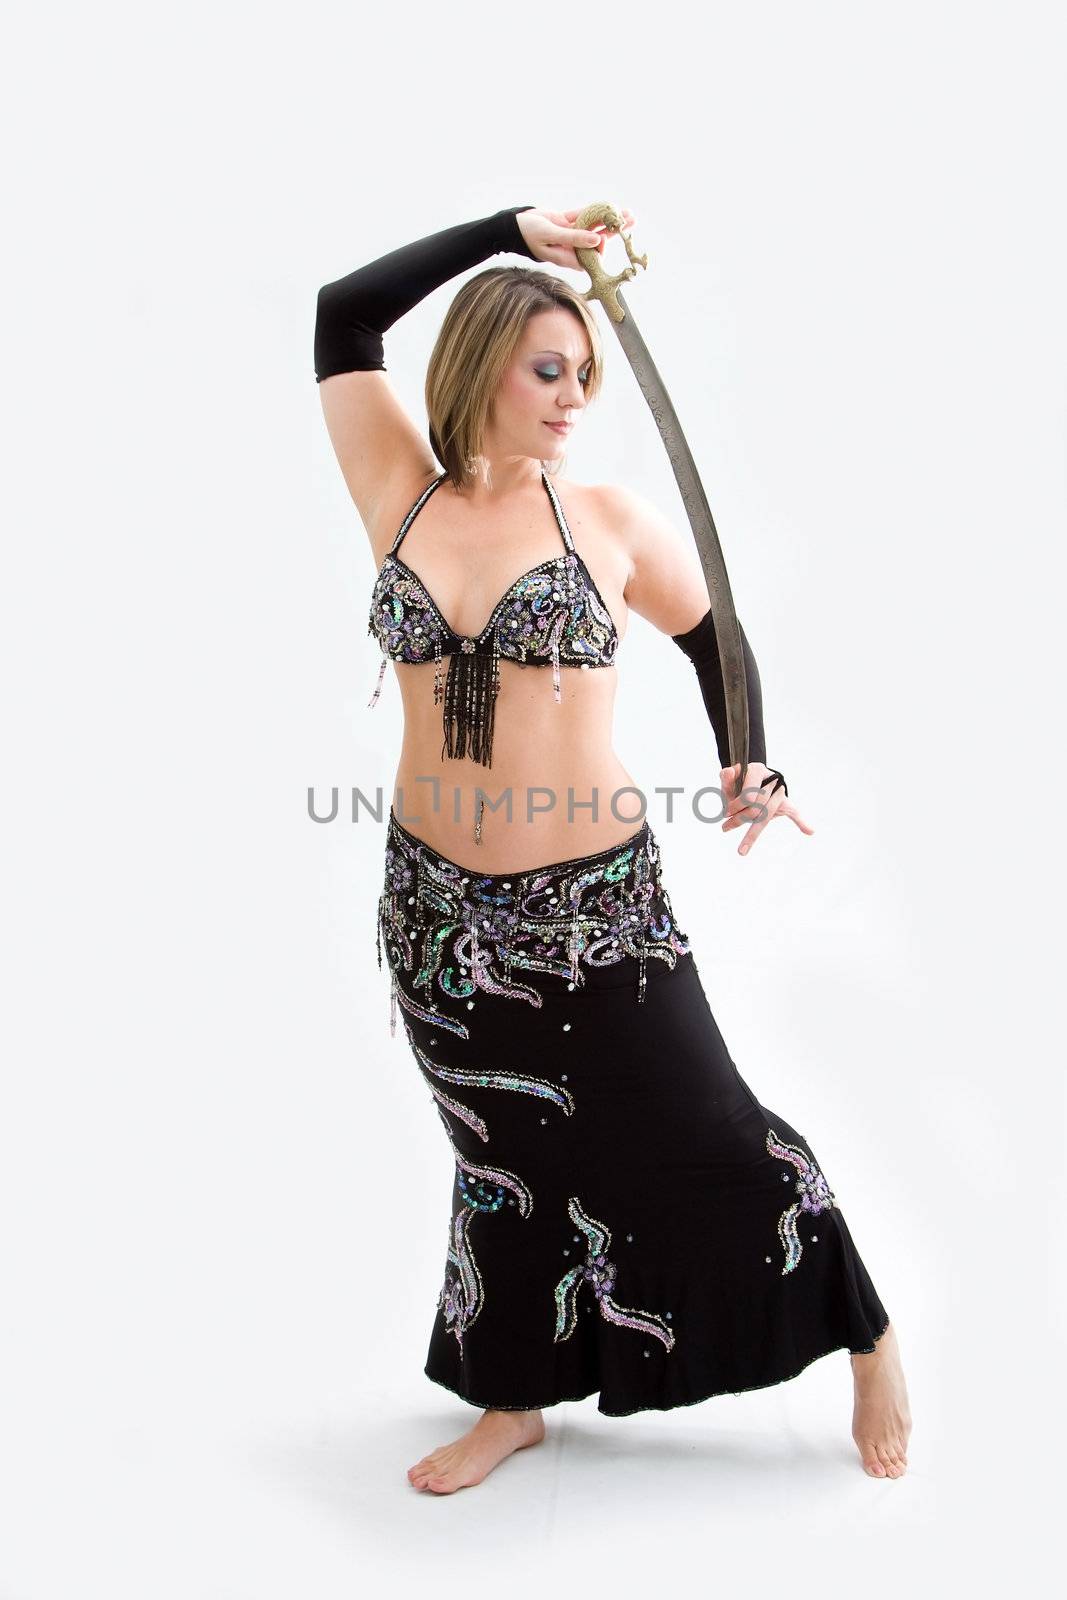 Beautiful belly dancer in black outfit holding sword, isolated